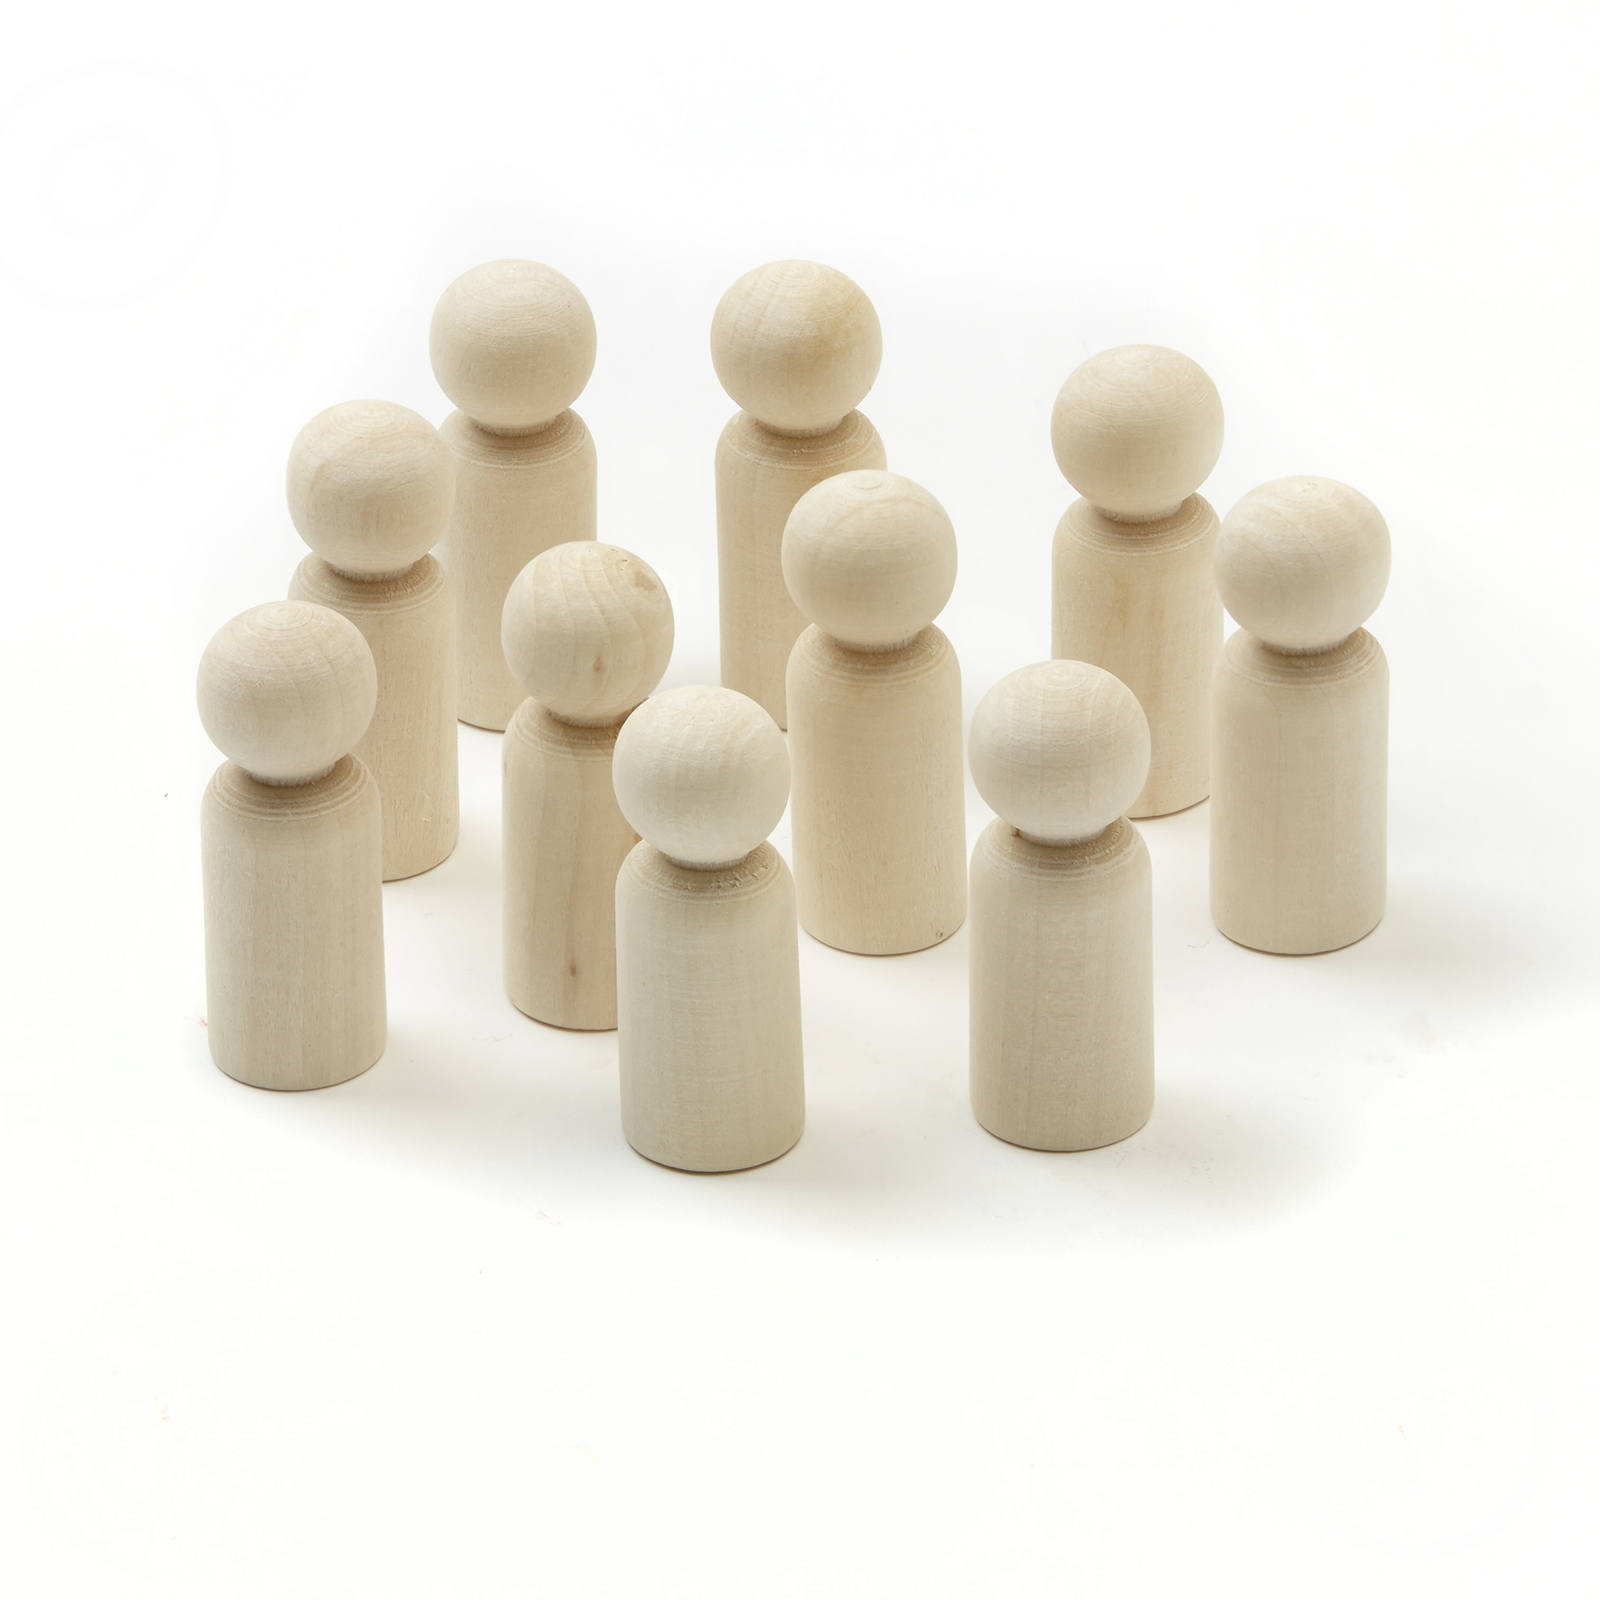 Wooden Peg People - Small - Pack of 10